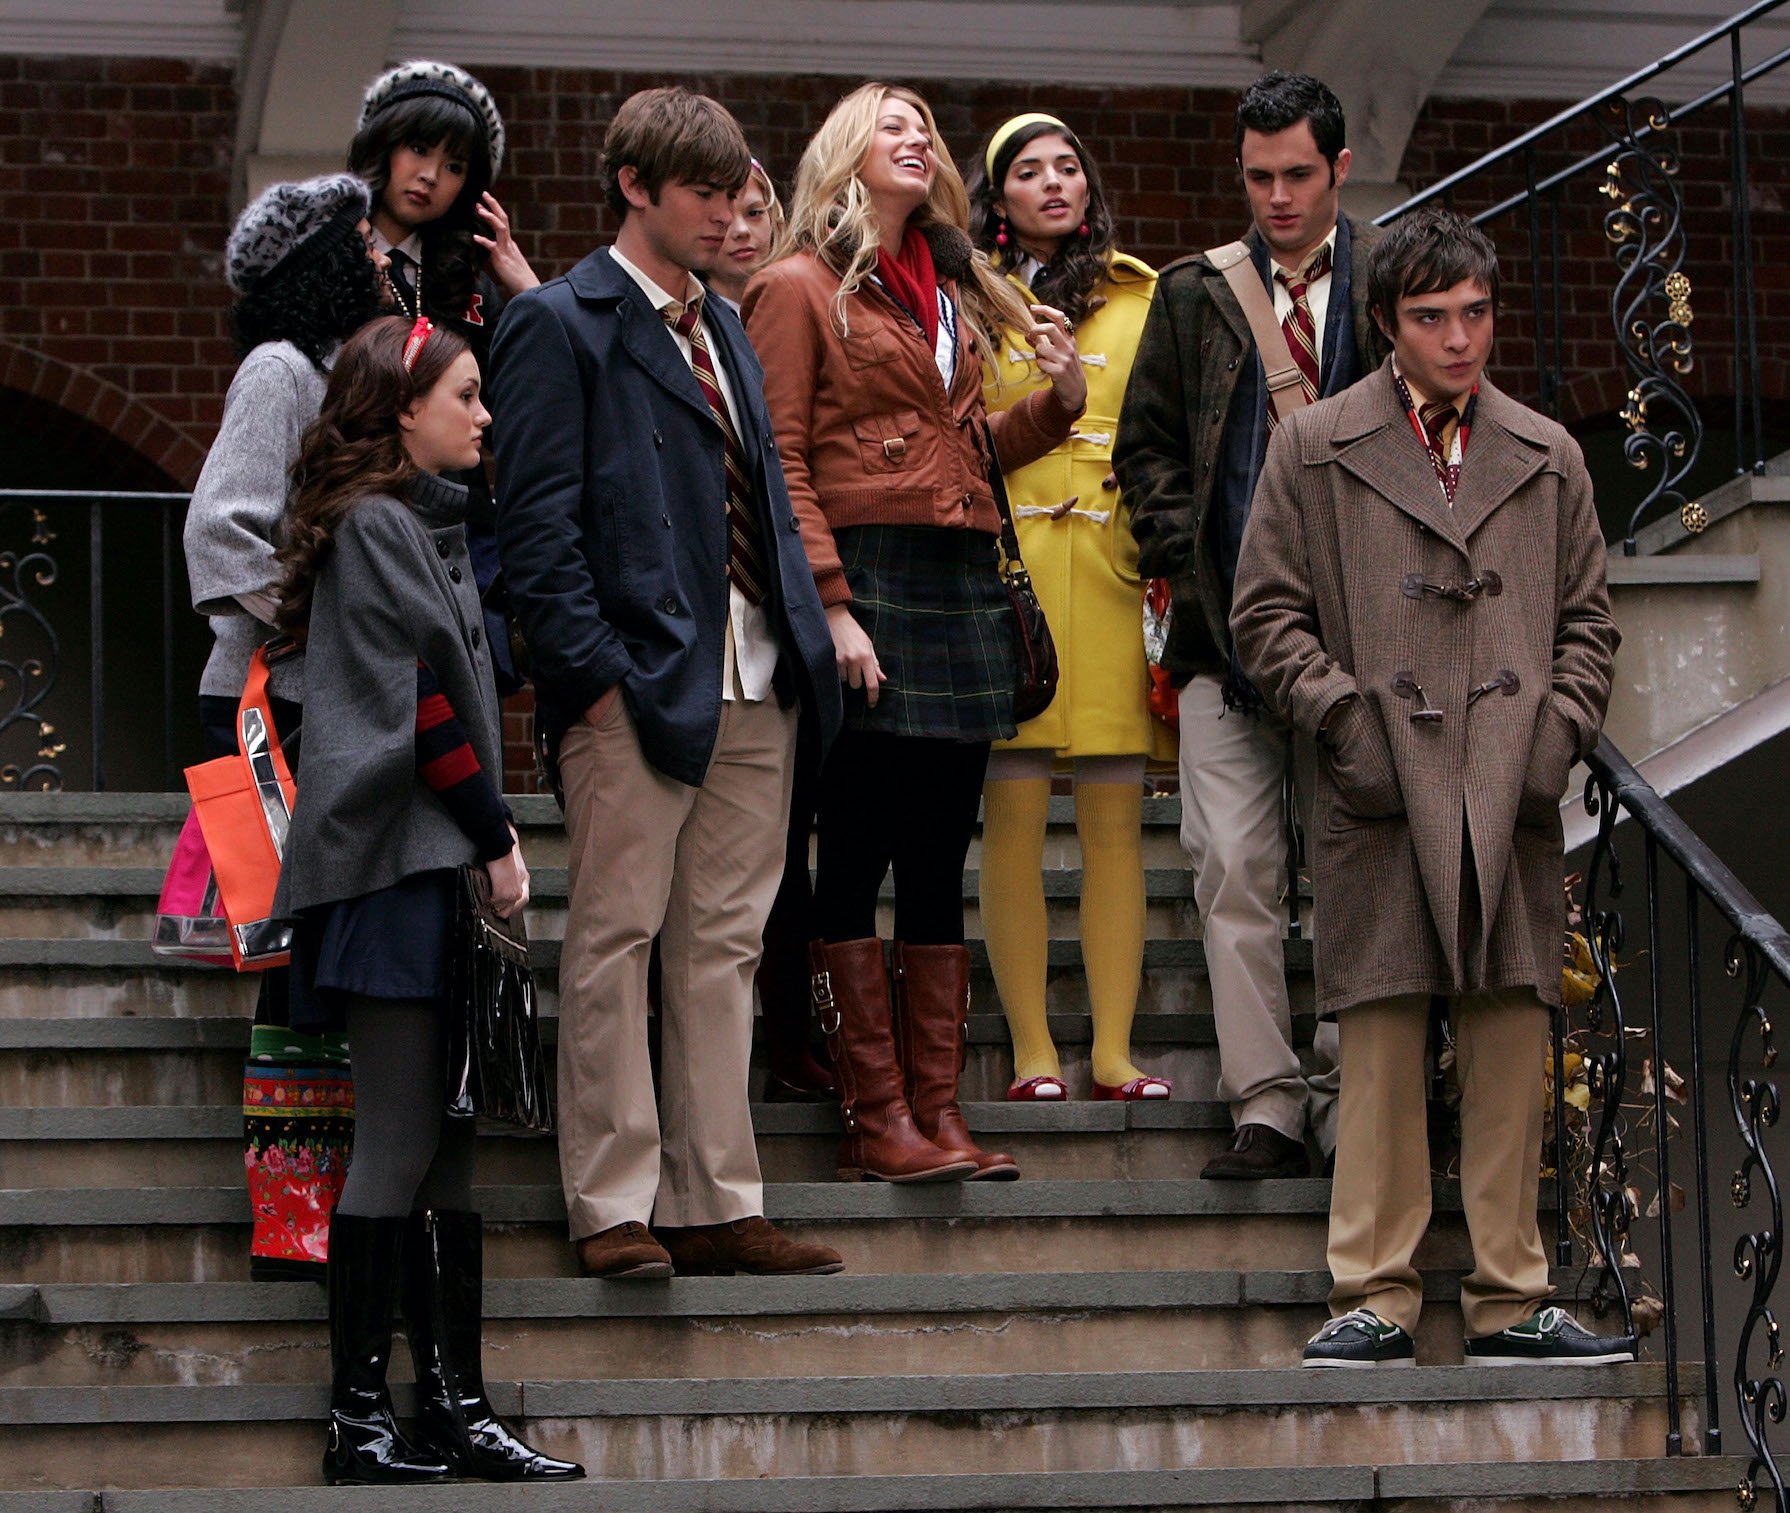 'Gossip Girl' cast filming a scene from the show